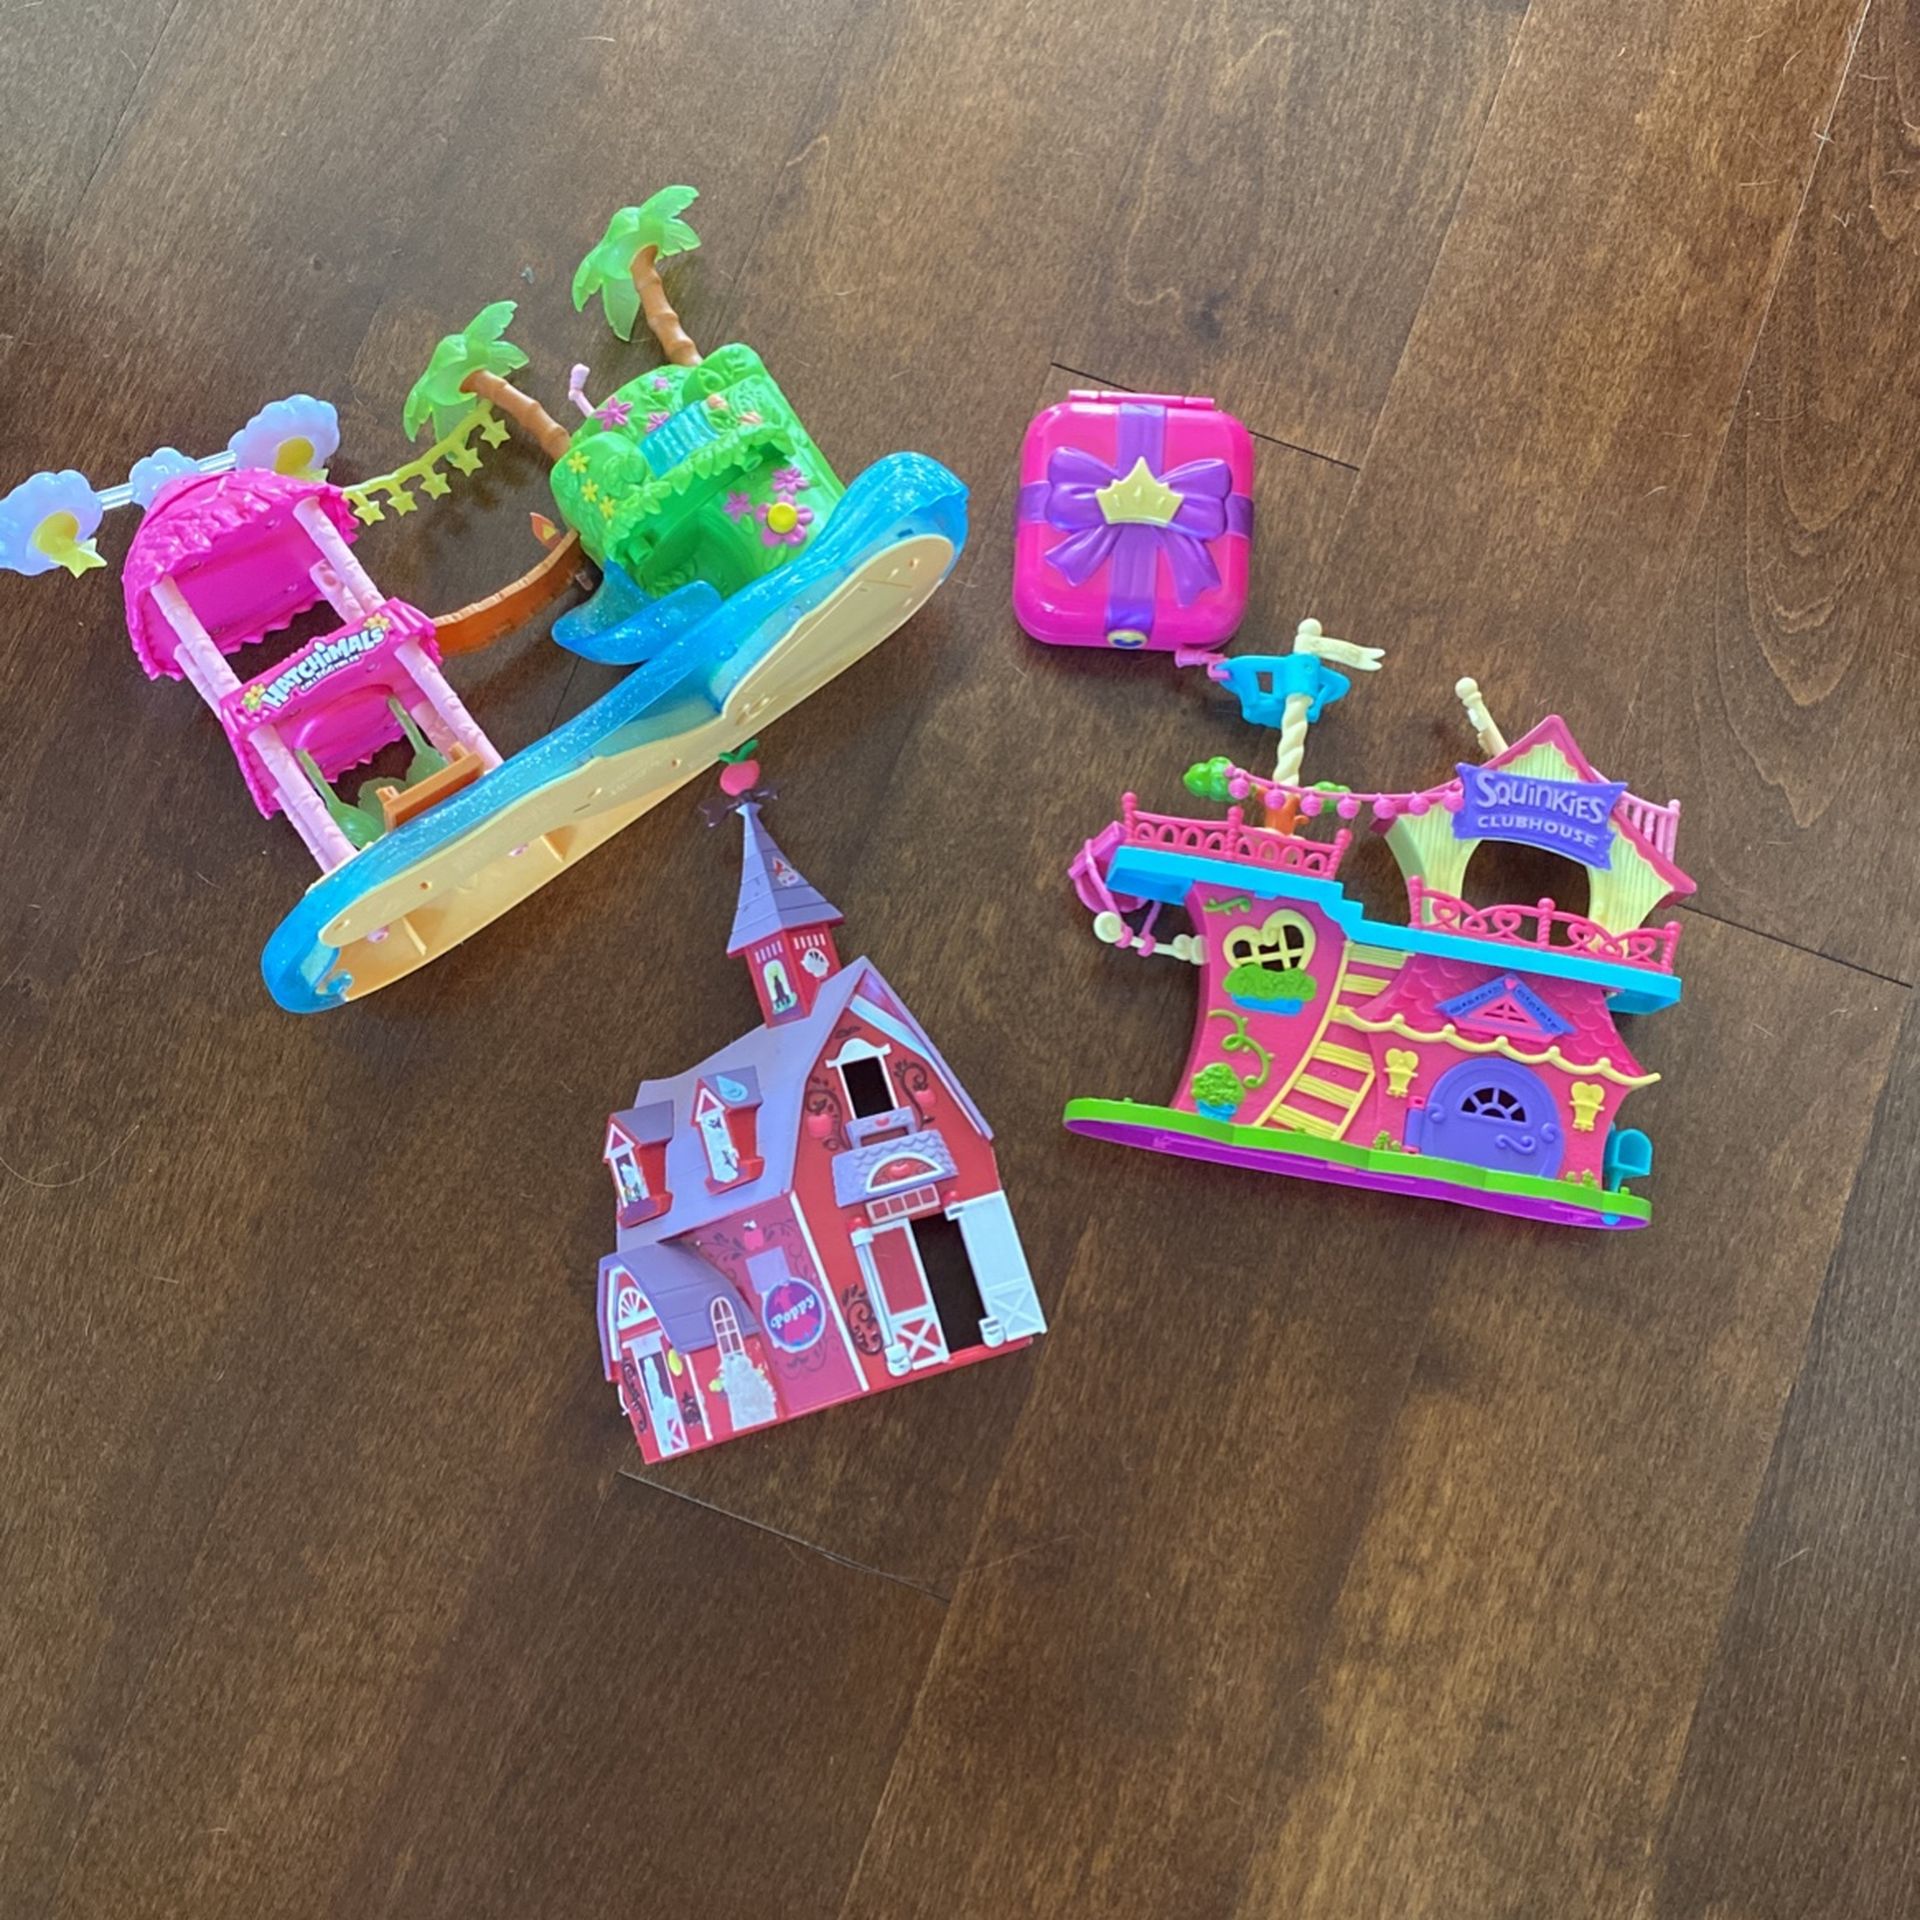 Small You Houses - Hachimals, Shopkins, My Little Pony